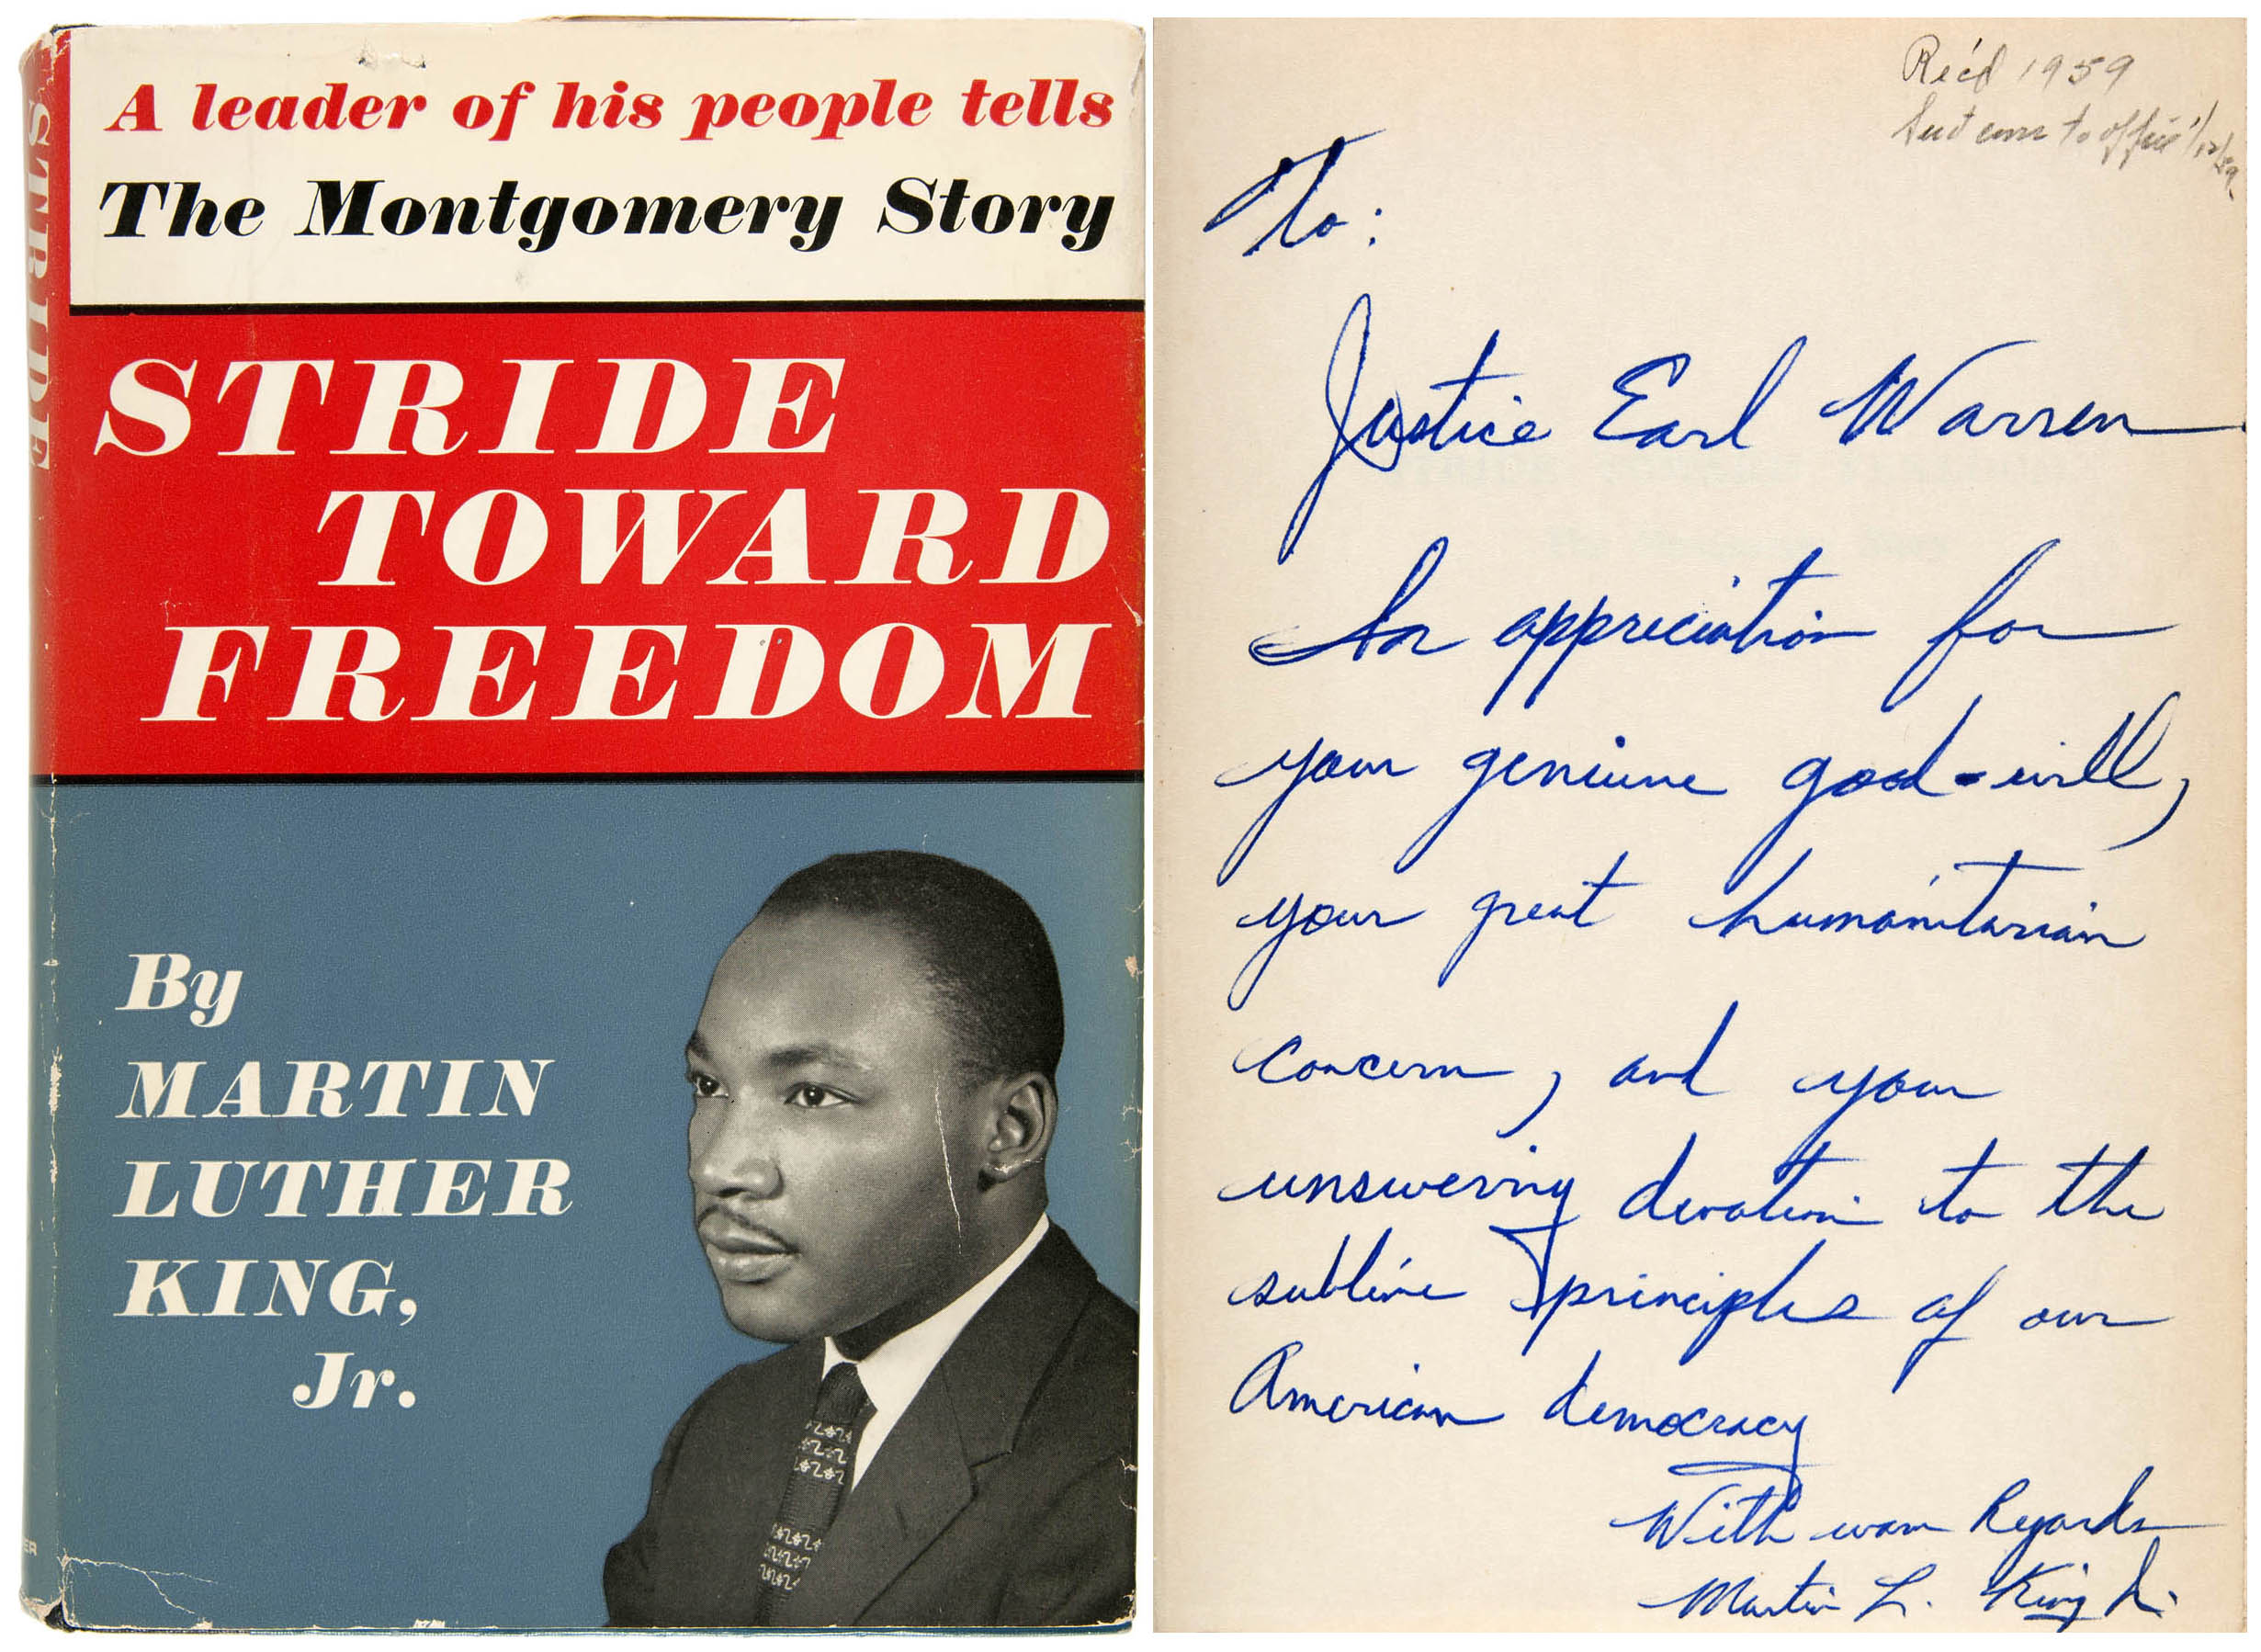 ‘Stride Toward Freedom’ 1st edition book by Rev. Dr. Martin Luther King Jr., published 1958, signed and inscribed by King to US Supreme Court Chief Justice Earl Warren. Warren family provenance. Est. $20,000-$35,000. Hake’s image